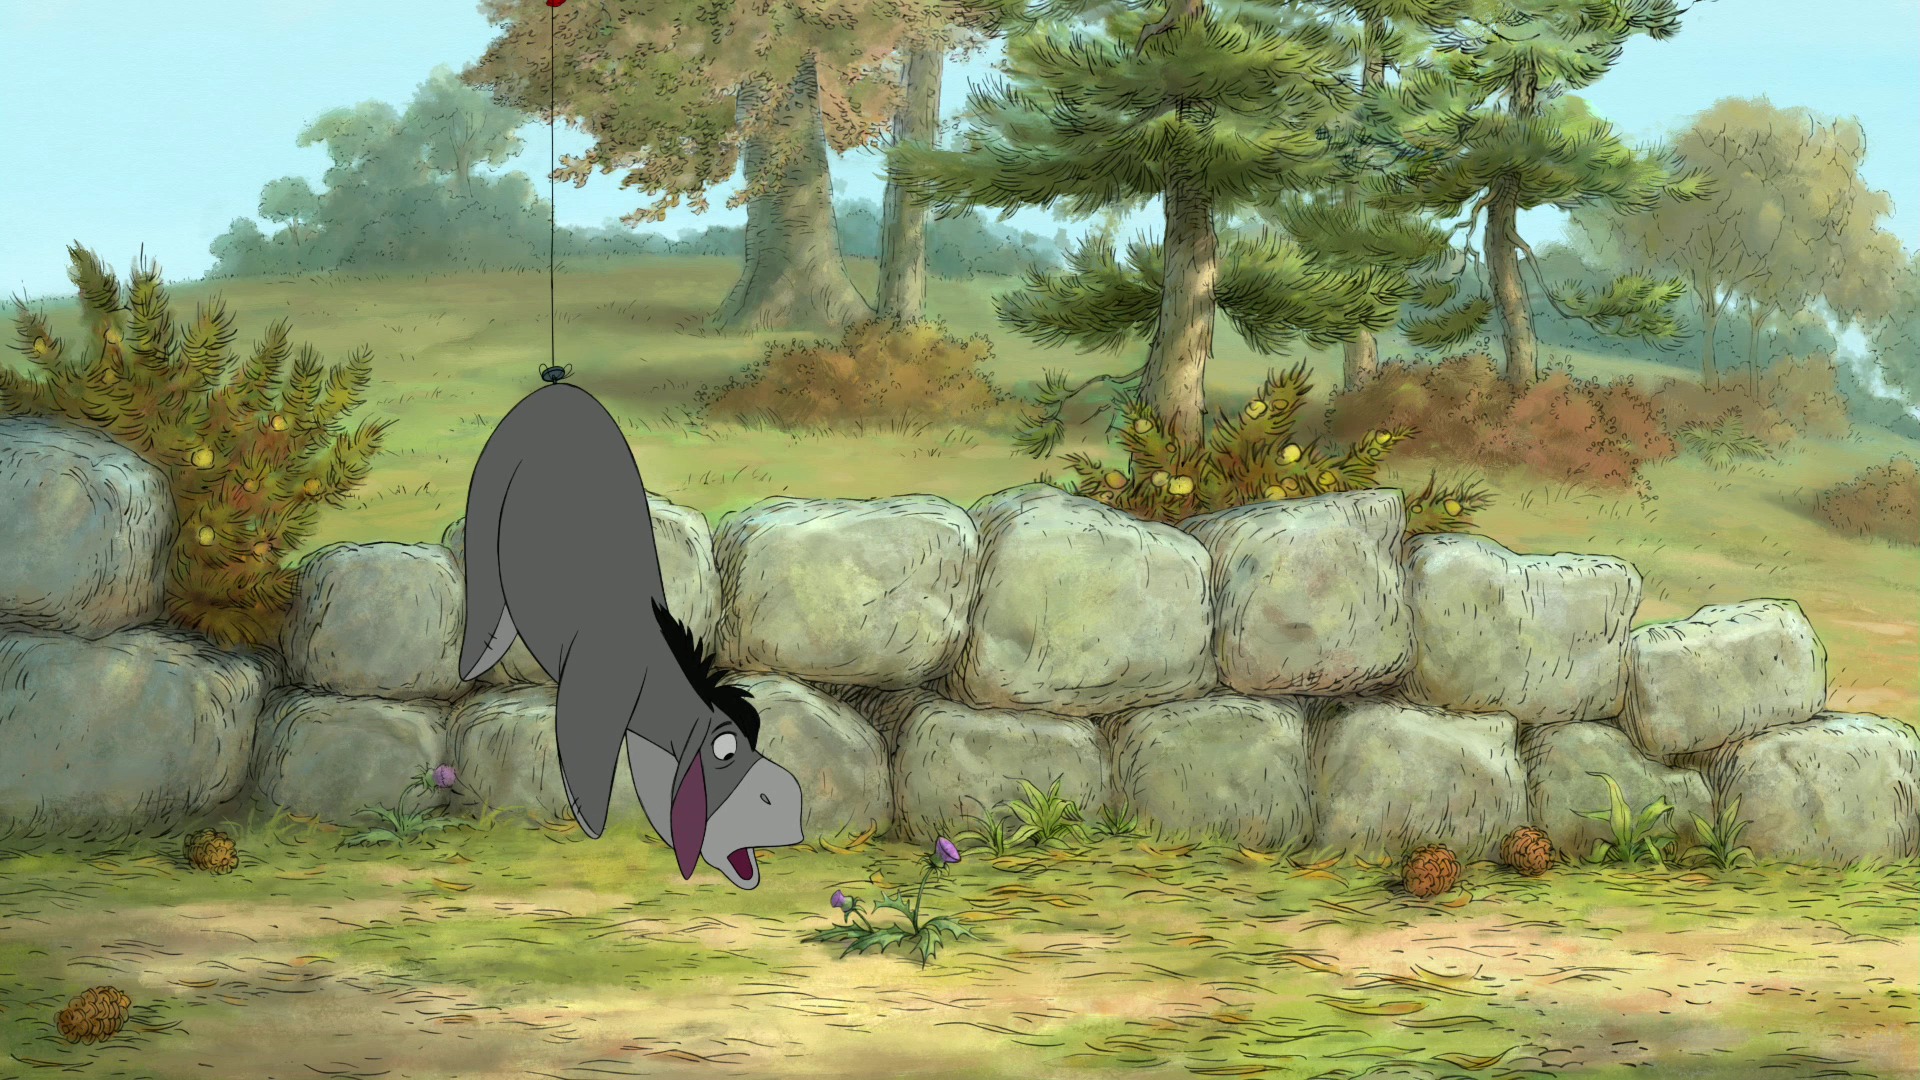 Winnie The Pooh - Winnie The Pooh 2011 Eeyore's Tail , HD Wallpaper & Backgrounds